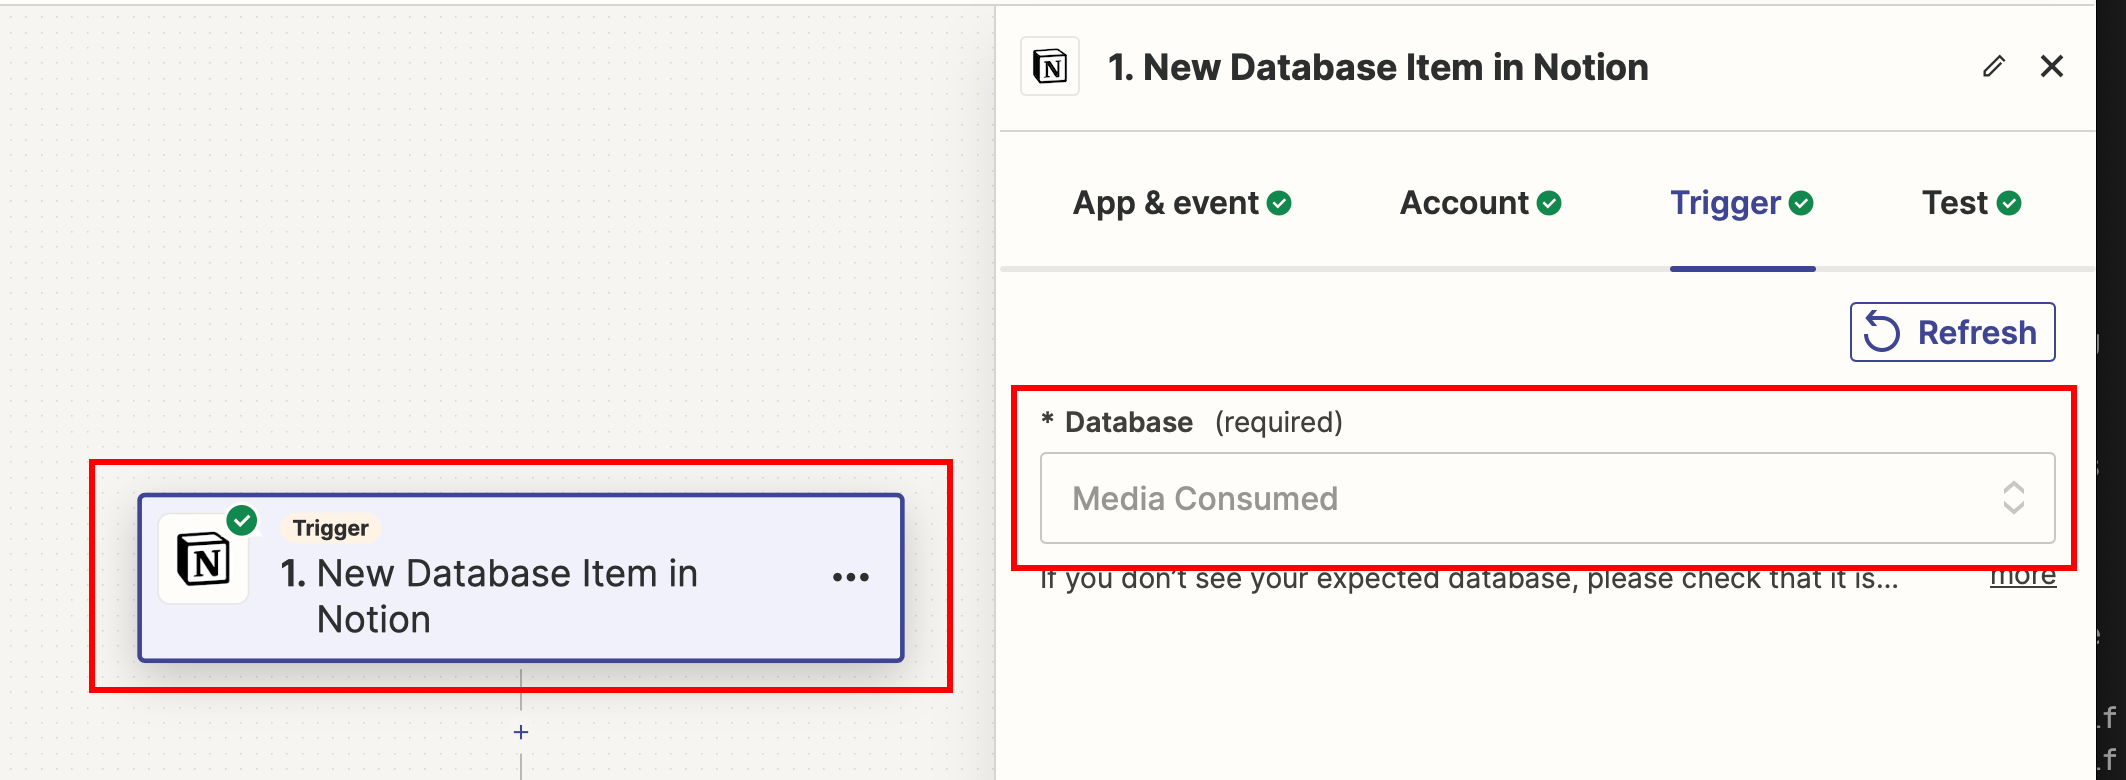 Creating a new database item trigger in Notion